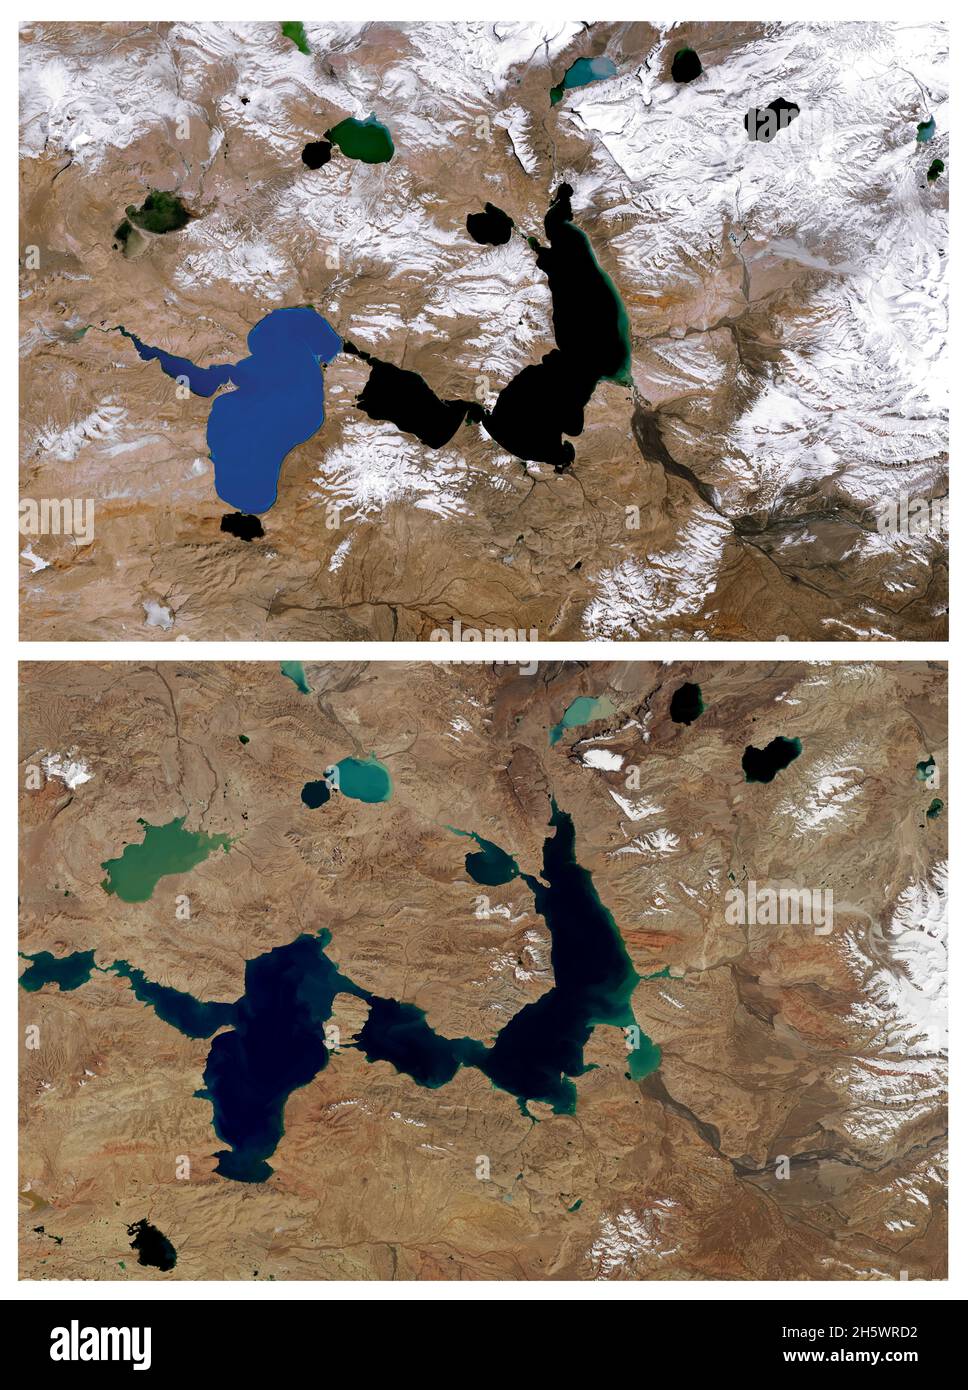 Climate Change: Shrinking Glaciers and Growing Lakes. These images of lakes west of the Tanggula Mountains, a small range in the central part of the Tibetan Plateau, offer a view of changes caused, in part, by retreating glaciers. The first image was acquired in October 1987; the second image shows the same area in October 2021. The two largest lakes - Chibzhang Co and Dorsoidong Co, have grown larger as the mountain glaciers have shrunk. The front edge of the glaciers have retreated significantly. A high resolution and enhanced composite of original Landsat5 and Landsat8 imagery. Credit NASA Stock Photo